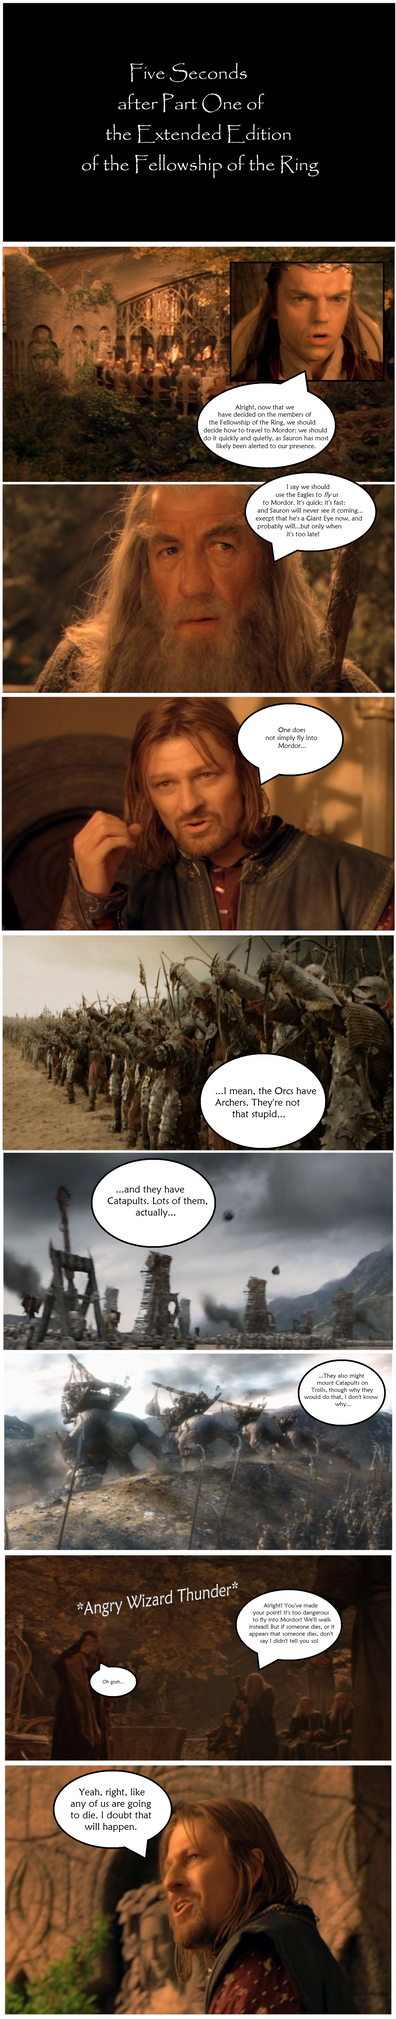 lord_of_the_rings__the_problem_with_eagl